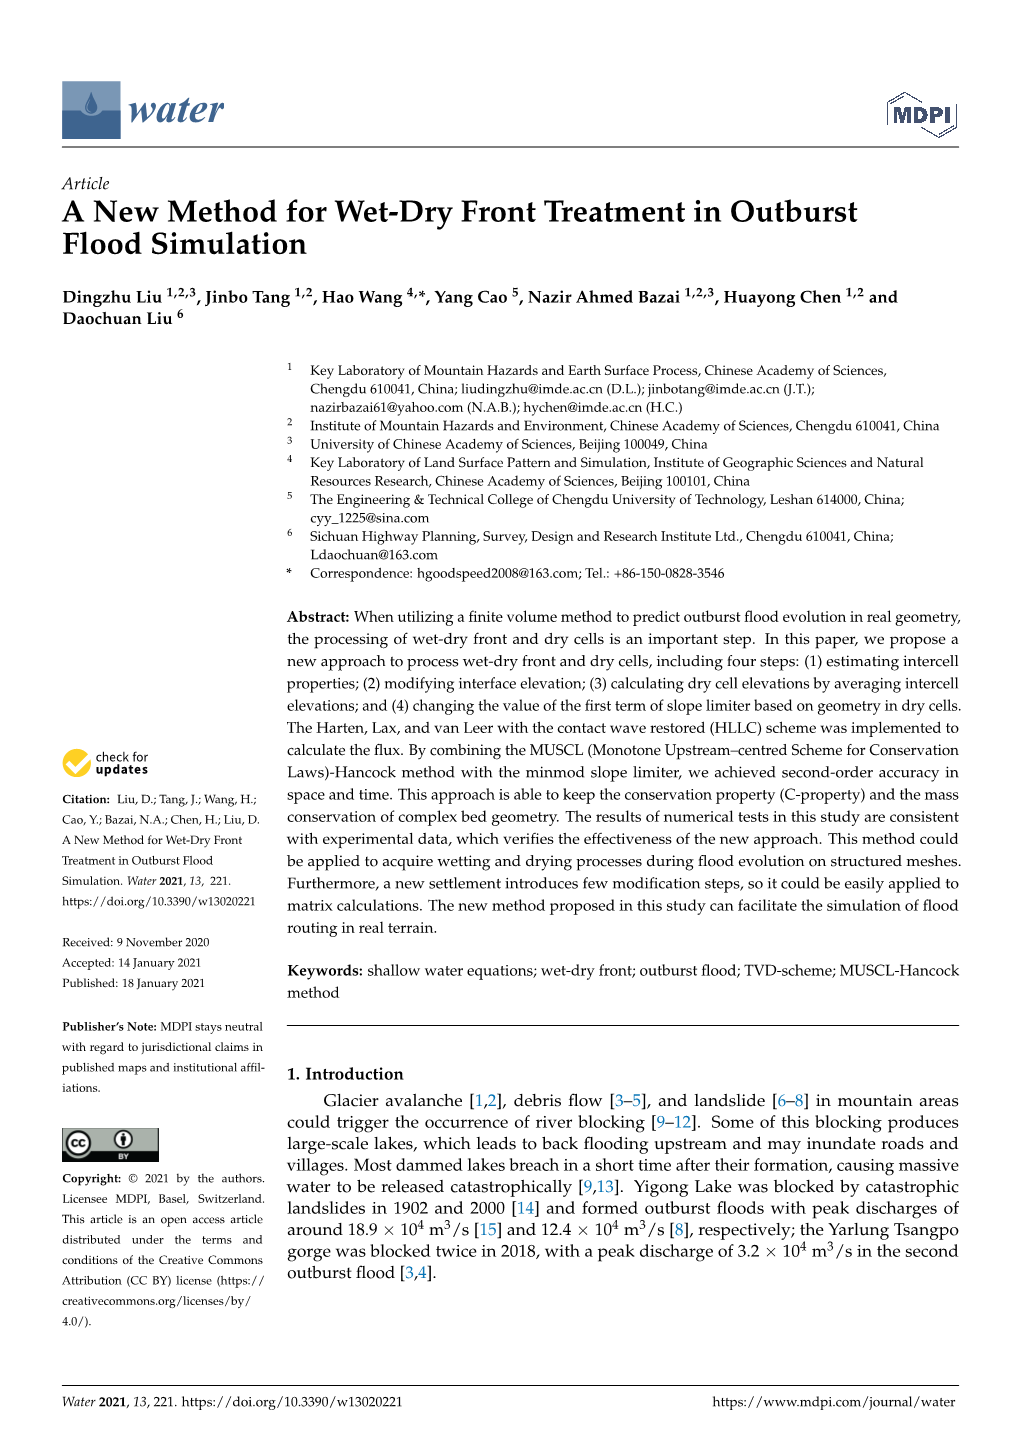 A New Method for Wet-Dry Front Treatment in Outburst Flood Simulation